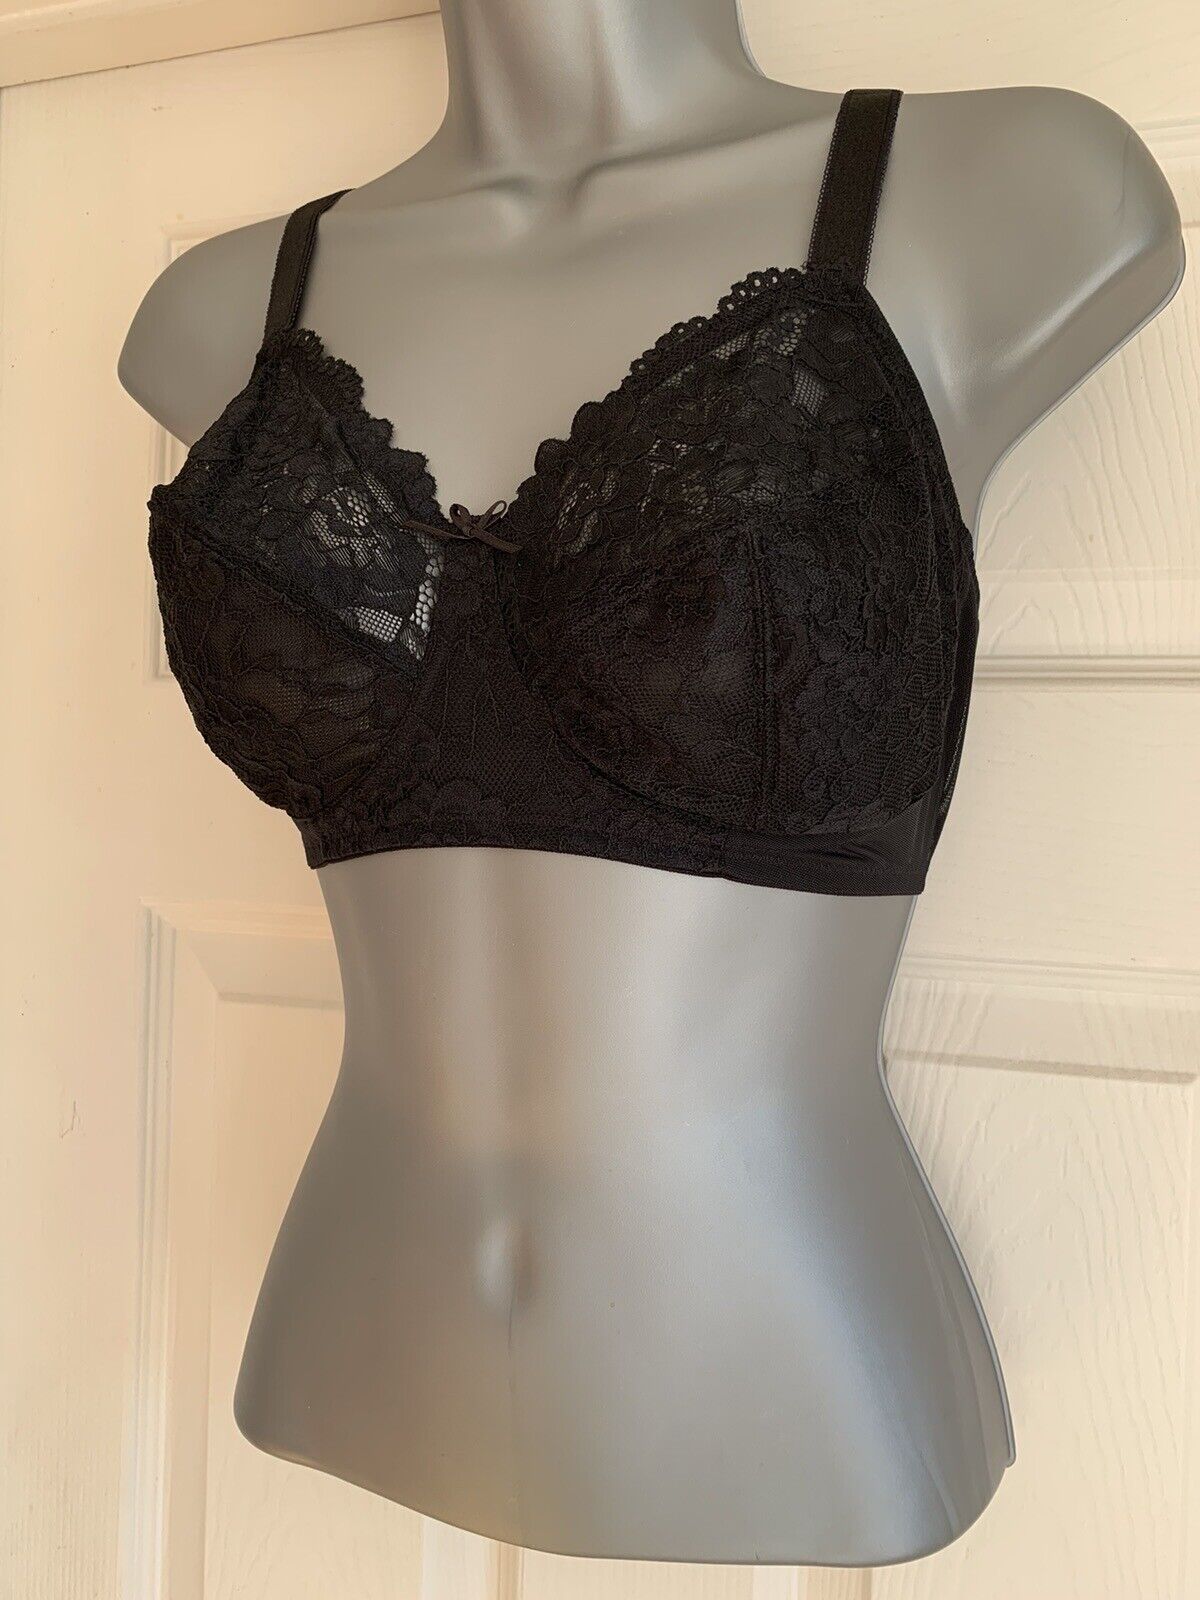 EX M*S Black Isabella Lace Full Cup Bra in Size 38C